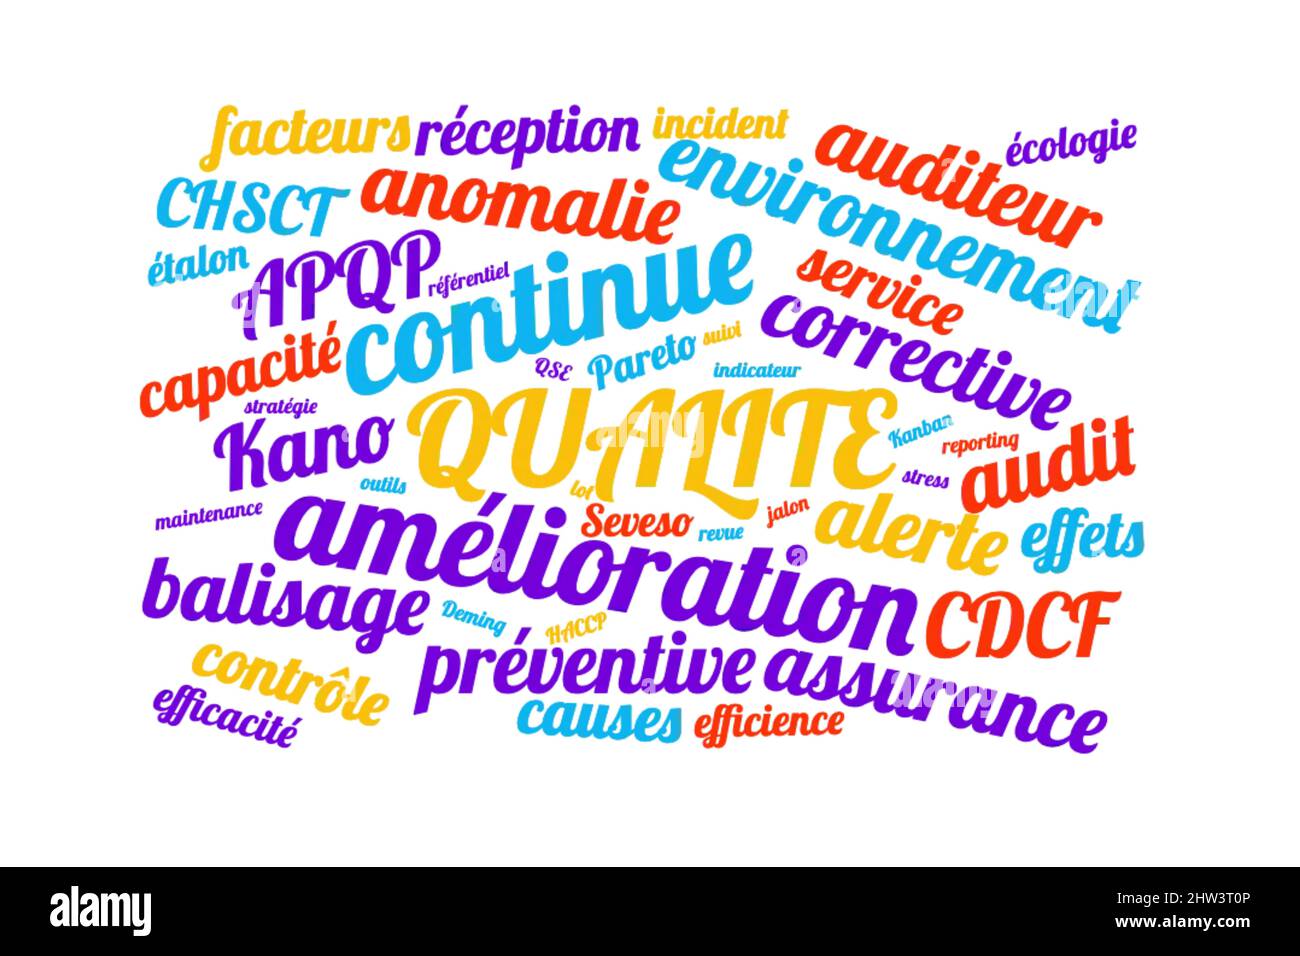 Quality word cloud vector illustration in French language Stock Photo